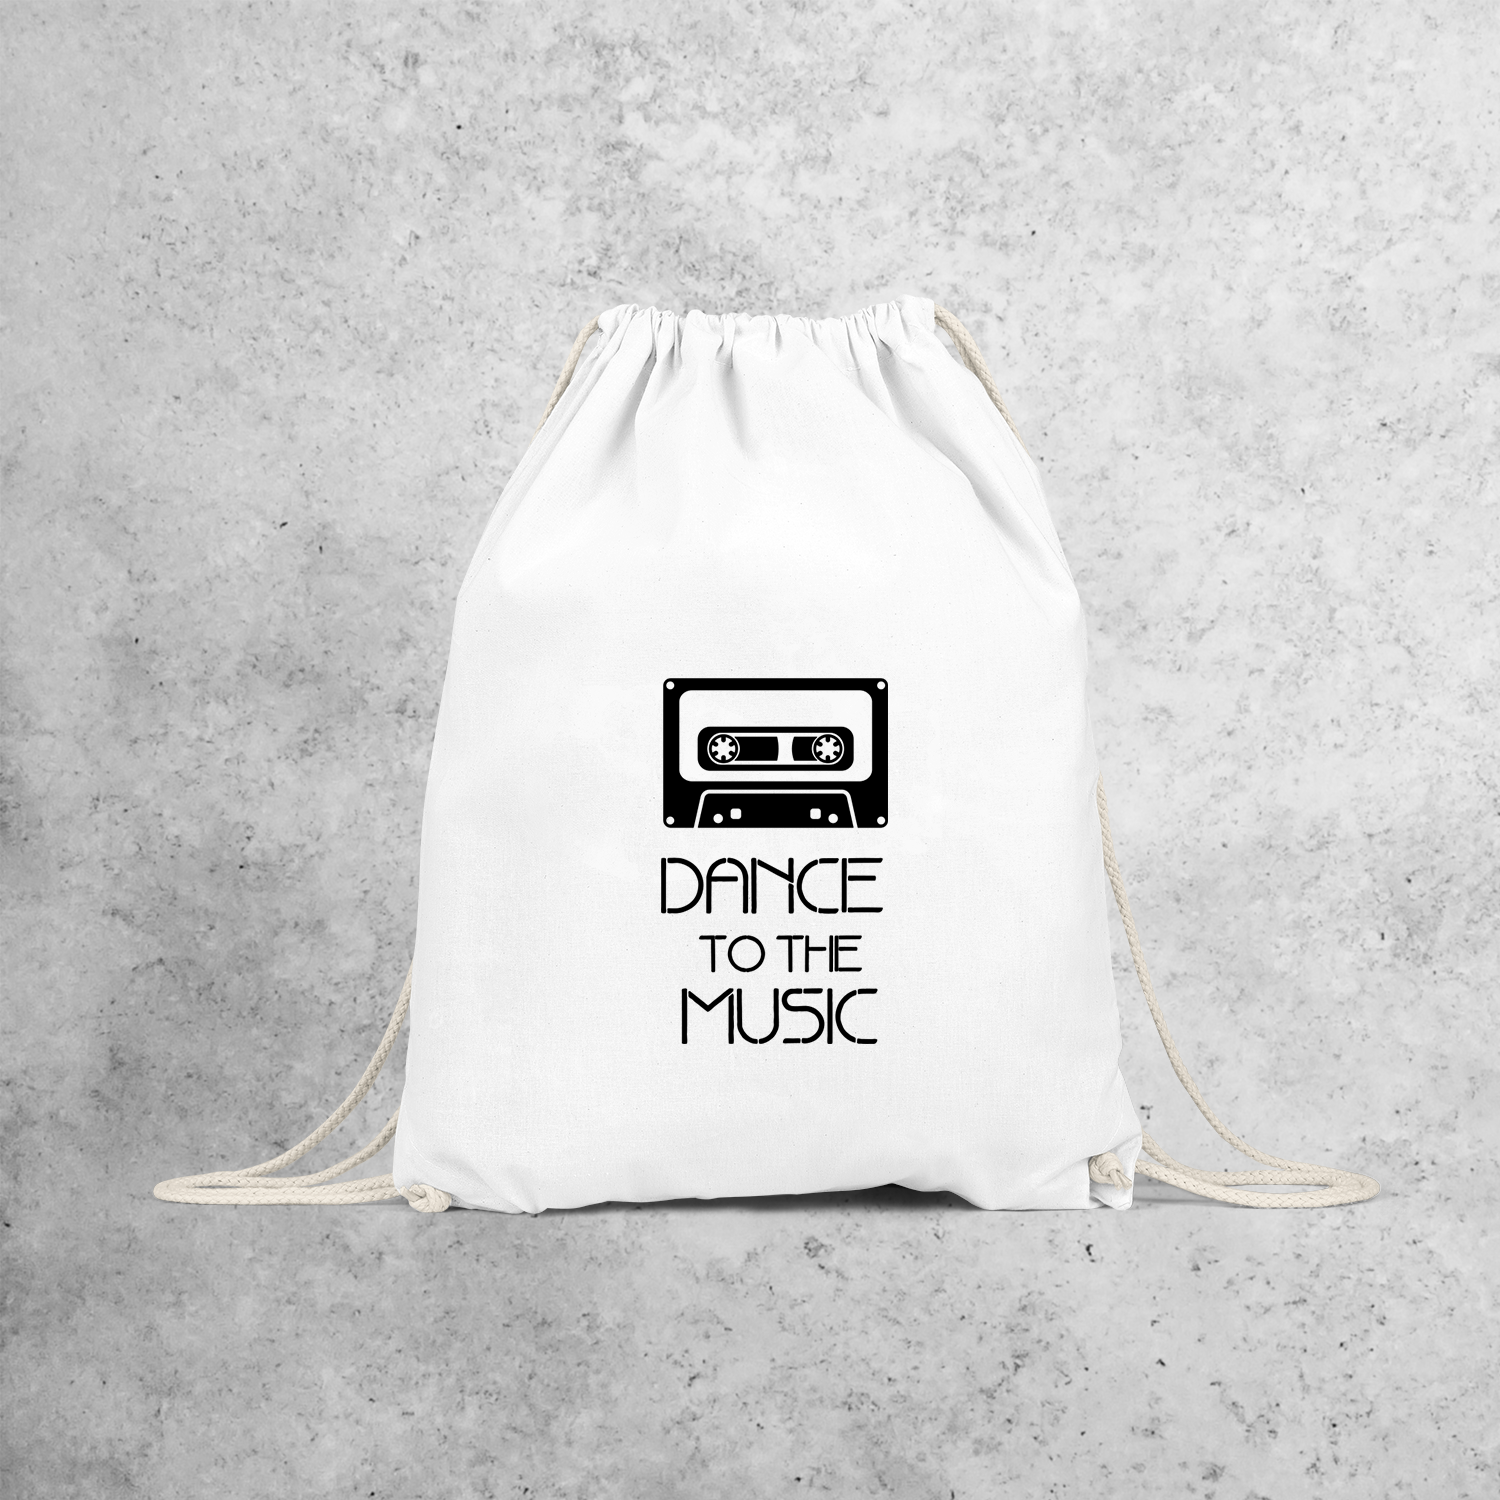 'Dance to the music' backpack